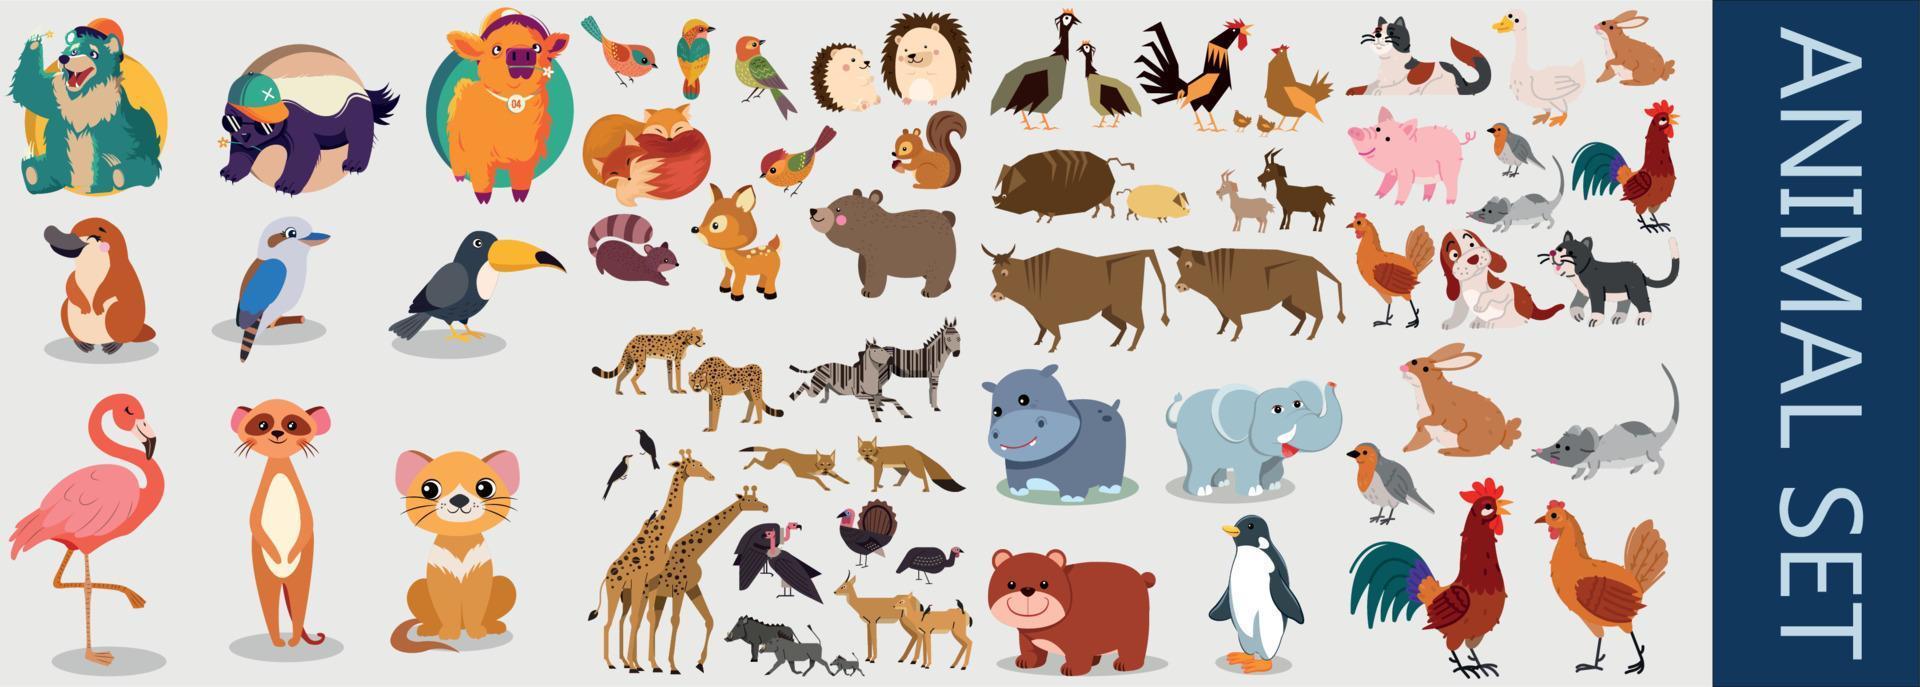 A large set of animals of the world vector